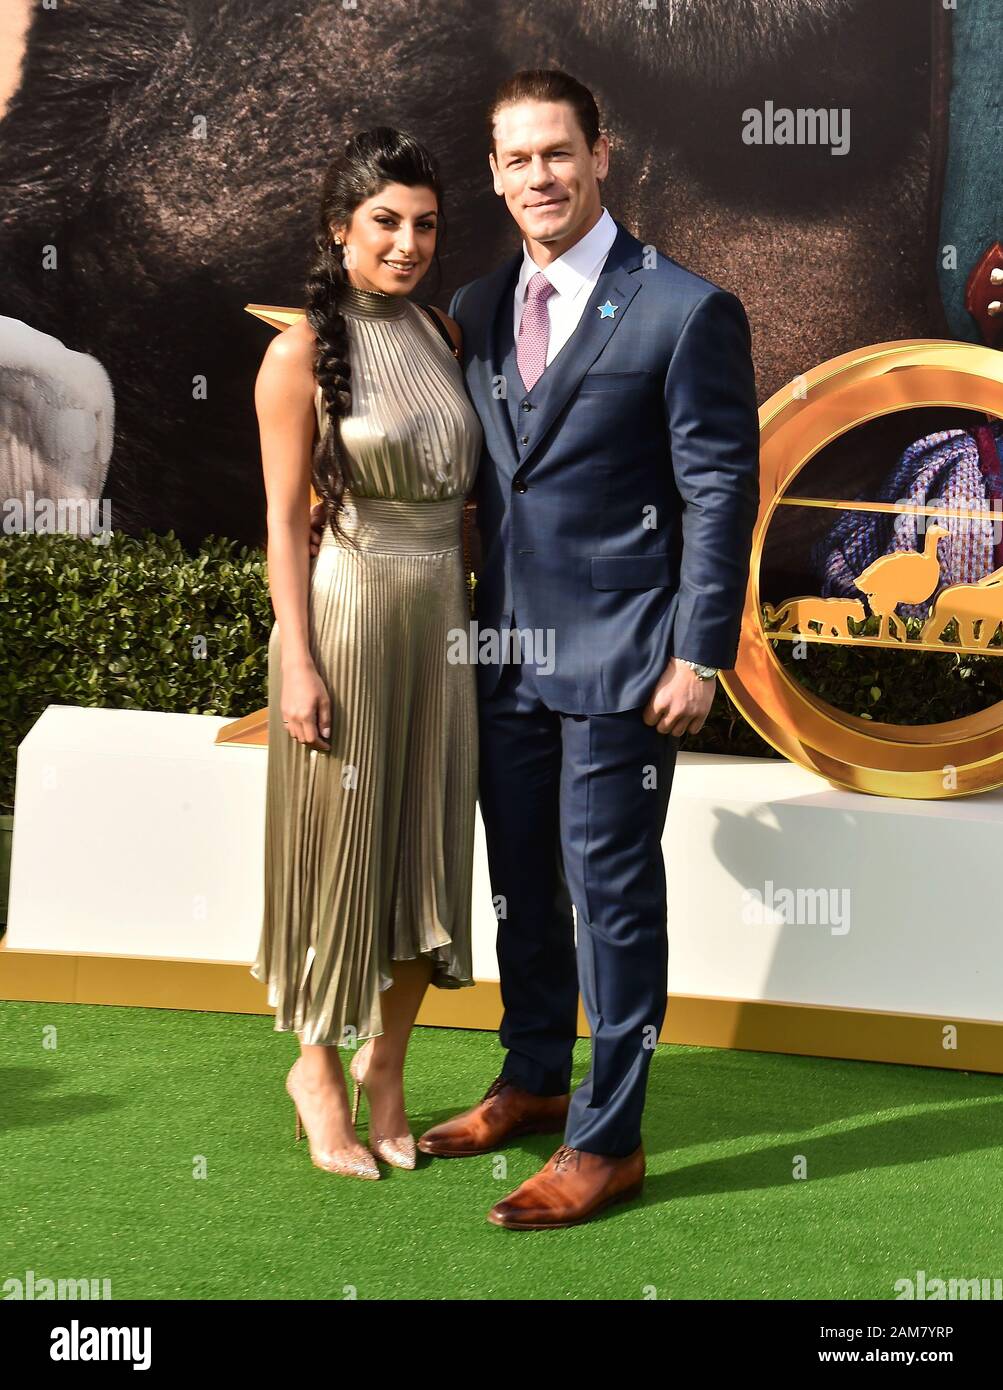 WESTWOOD, CA - JANUARY 11: Shay Shariatzadeh (L) and John Cena attend the Premiere of Universal Pictures' 'Dolittle' at Regency Village Theatre on January 11, 2020 in Westwood, California. Stock Photo